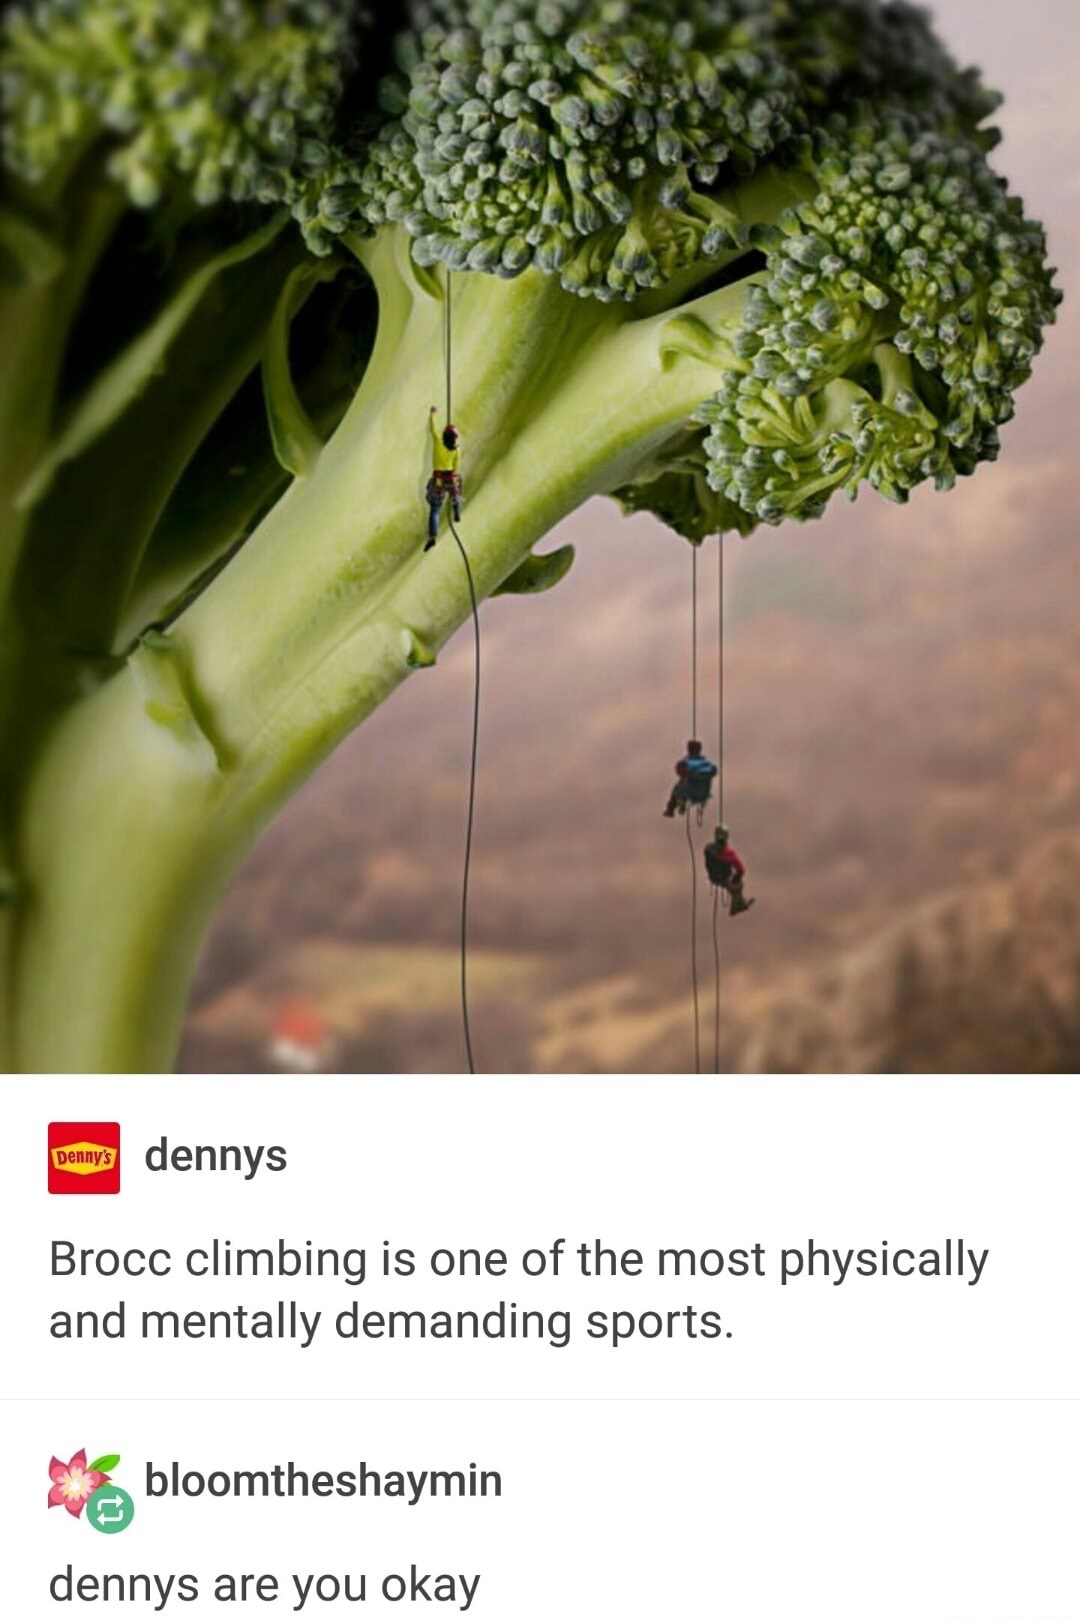 tree - Denys dennys Brocc climbing is one of the most physically and mentally demanding sports. bloomtheshaymin dennys are you okay